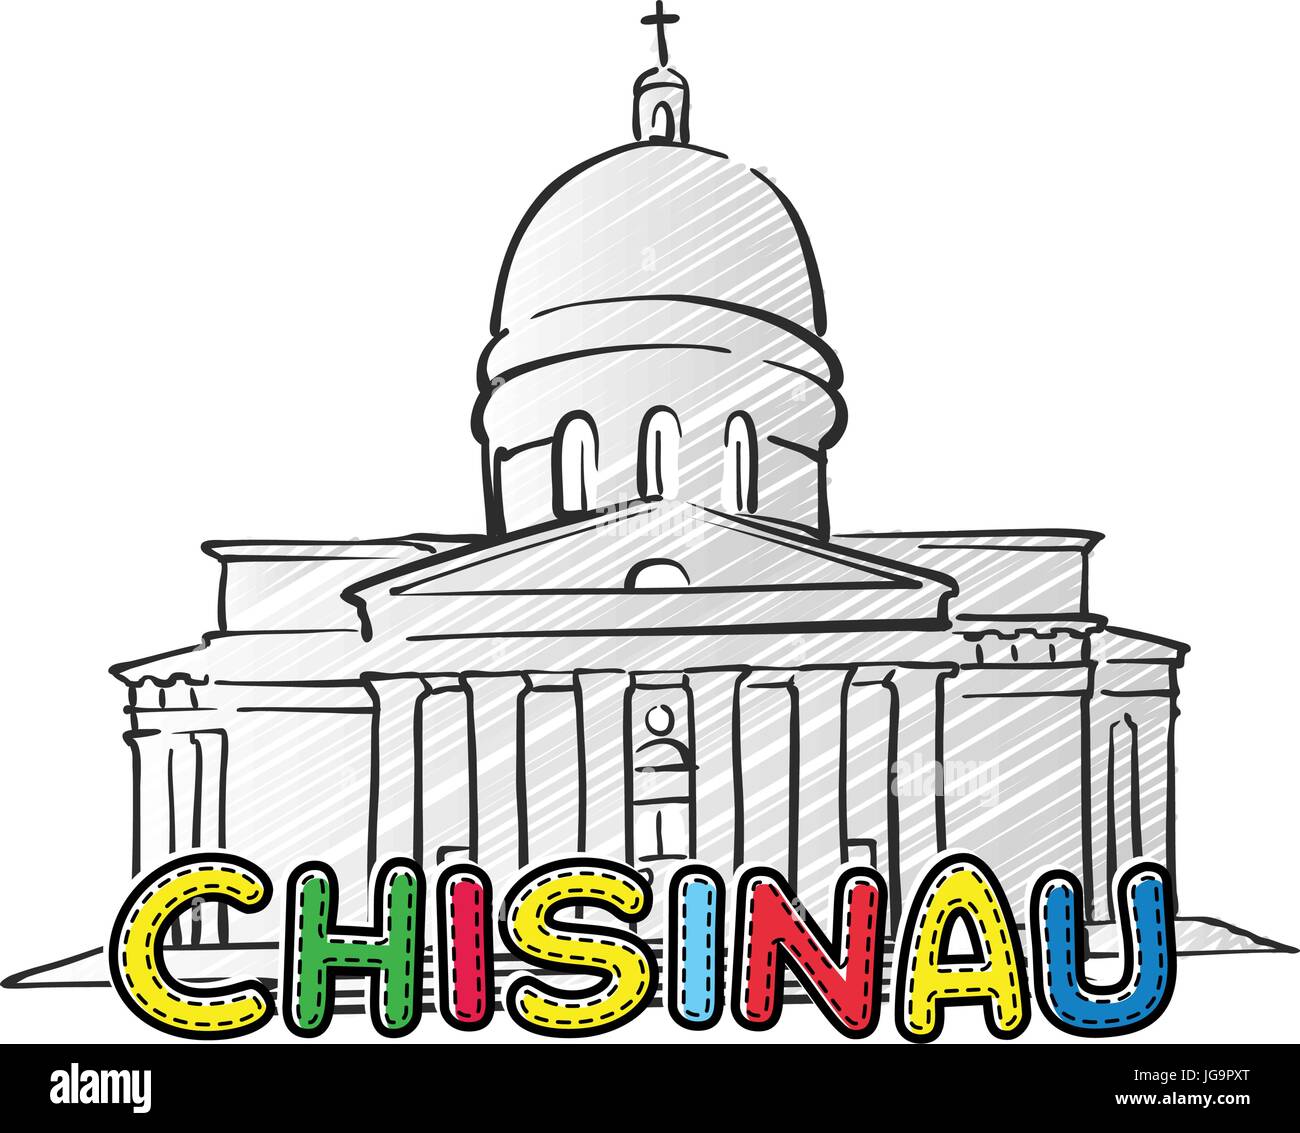 Chisinau beautiful sketched icon, famaous hand-drawn landmark, city name lettering, vector illustration Stock Vector